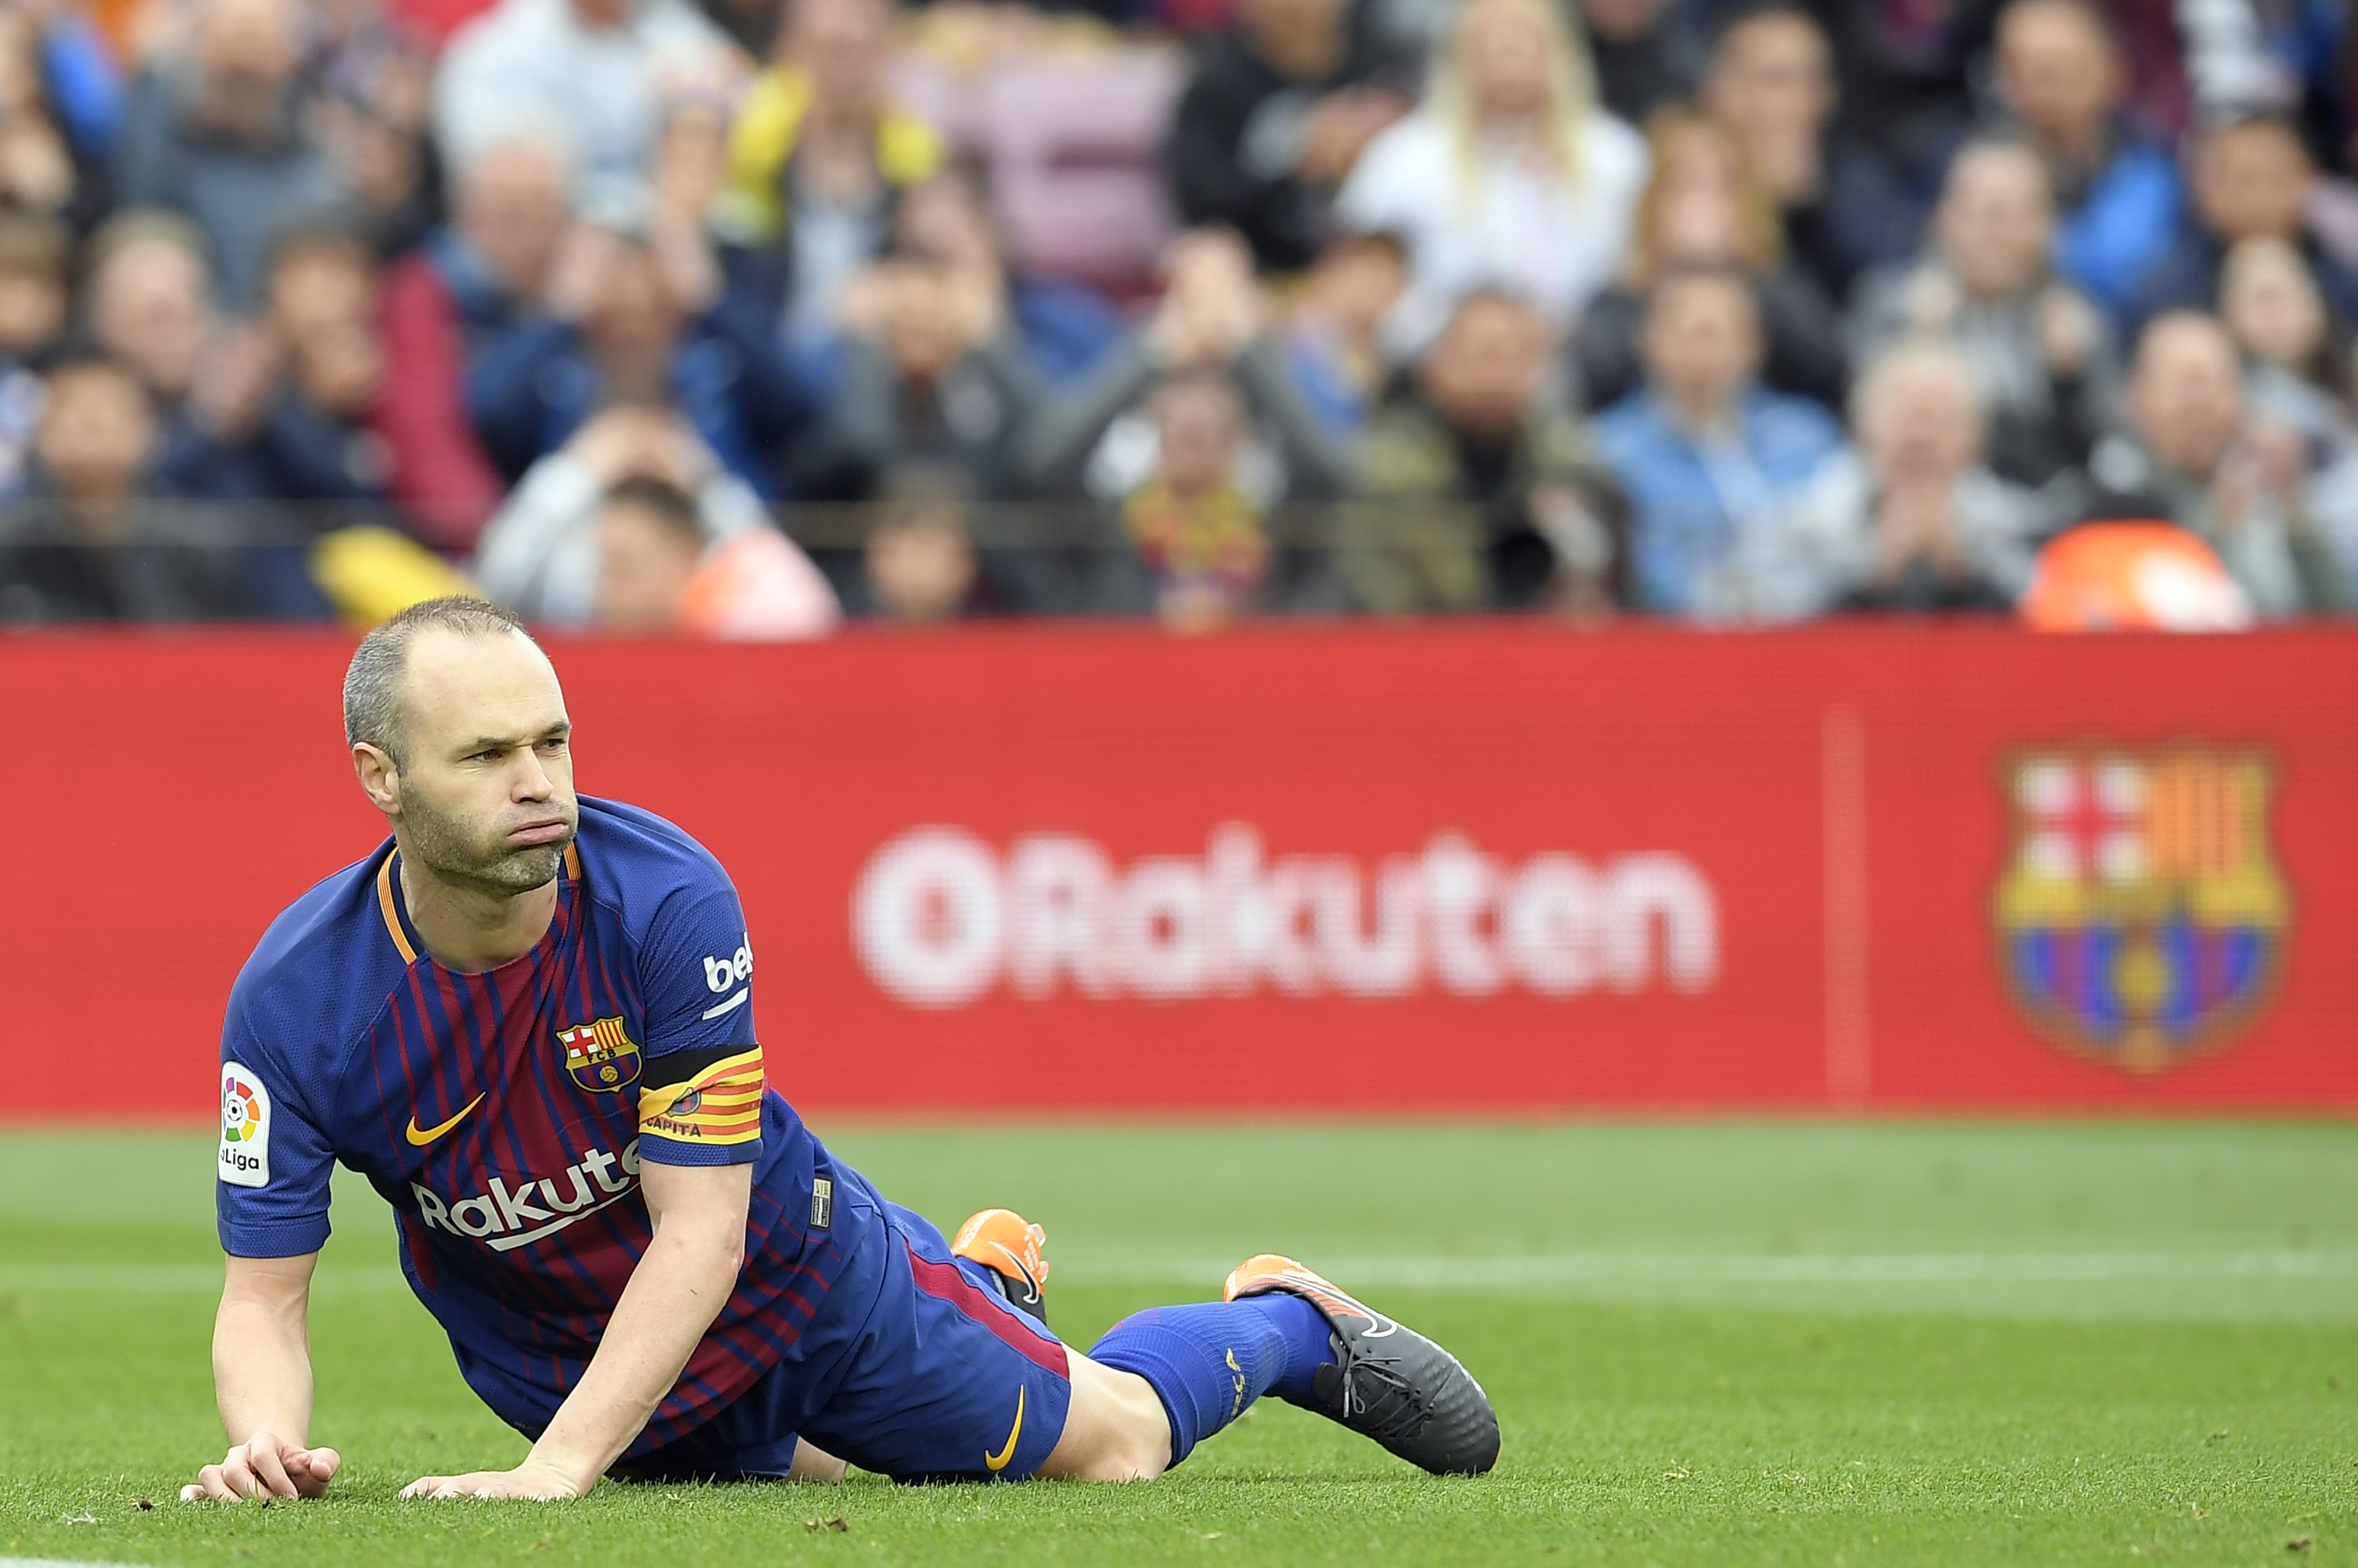 Barcelona's Spanish midfielder Andres Iniesta lies on the field during the Spanish league footbal match between FC Barcelona and Valencia CF at the Camp Nou stadium in Barcelona on April 14, 2018. / AFP PHOTO / LLUIS GENE        (Photo credit should read LLUIS GENE/AFP/Getty Images)